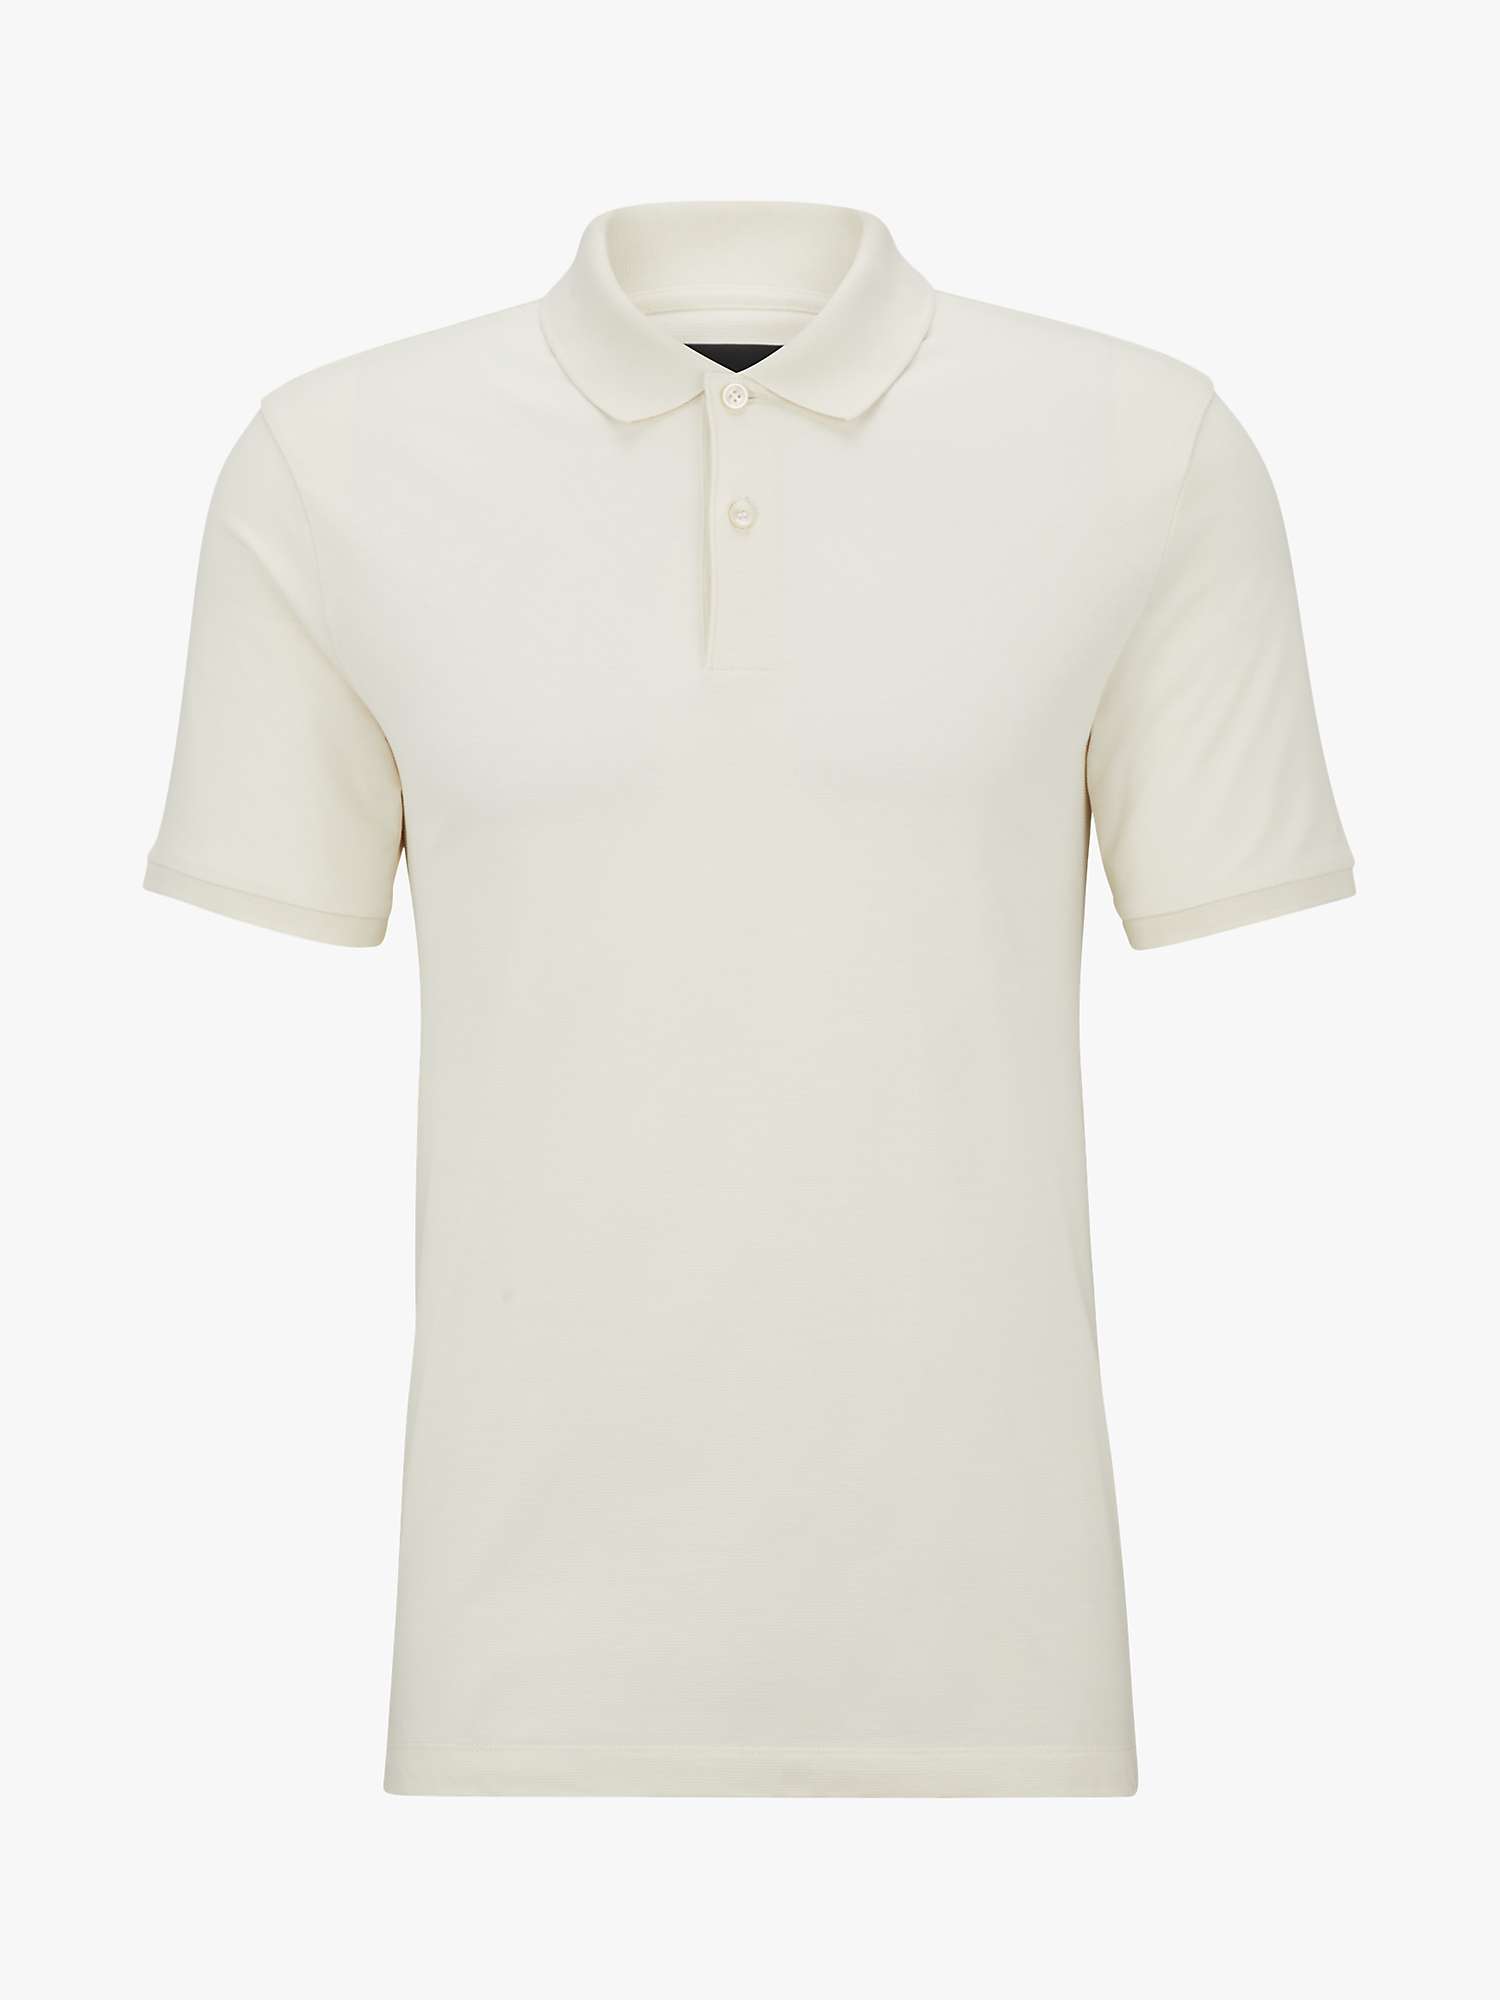 BOSS Parlay 195 Structure Jersey Polo Shirt, White at John Lewis & Partners